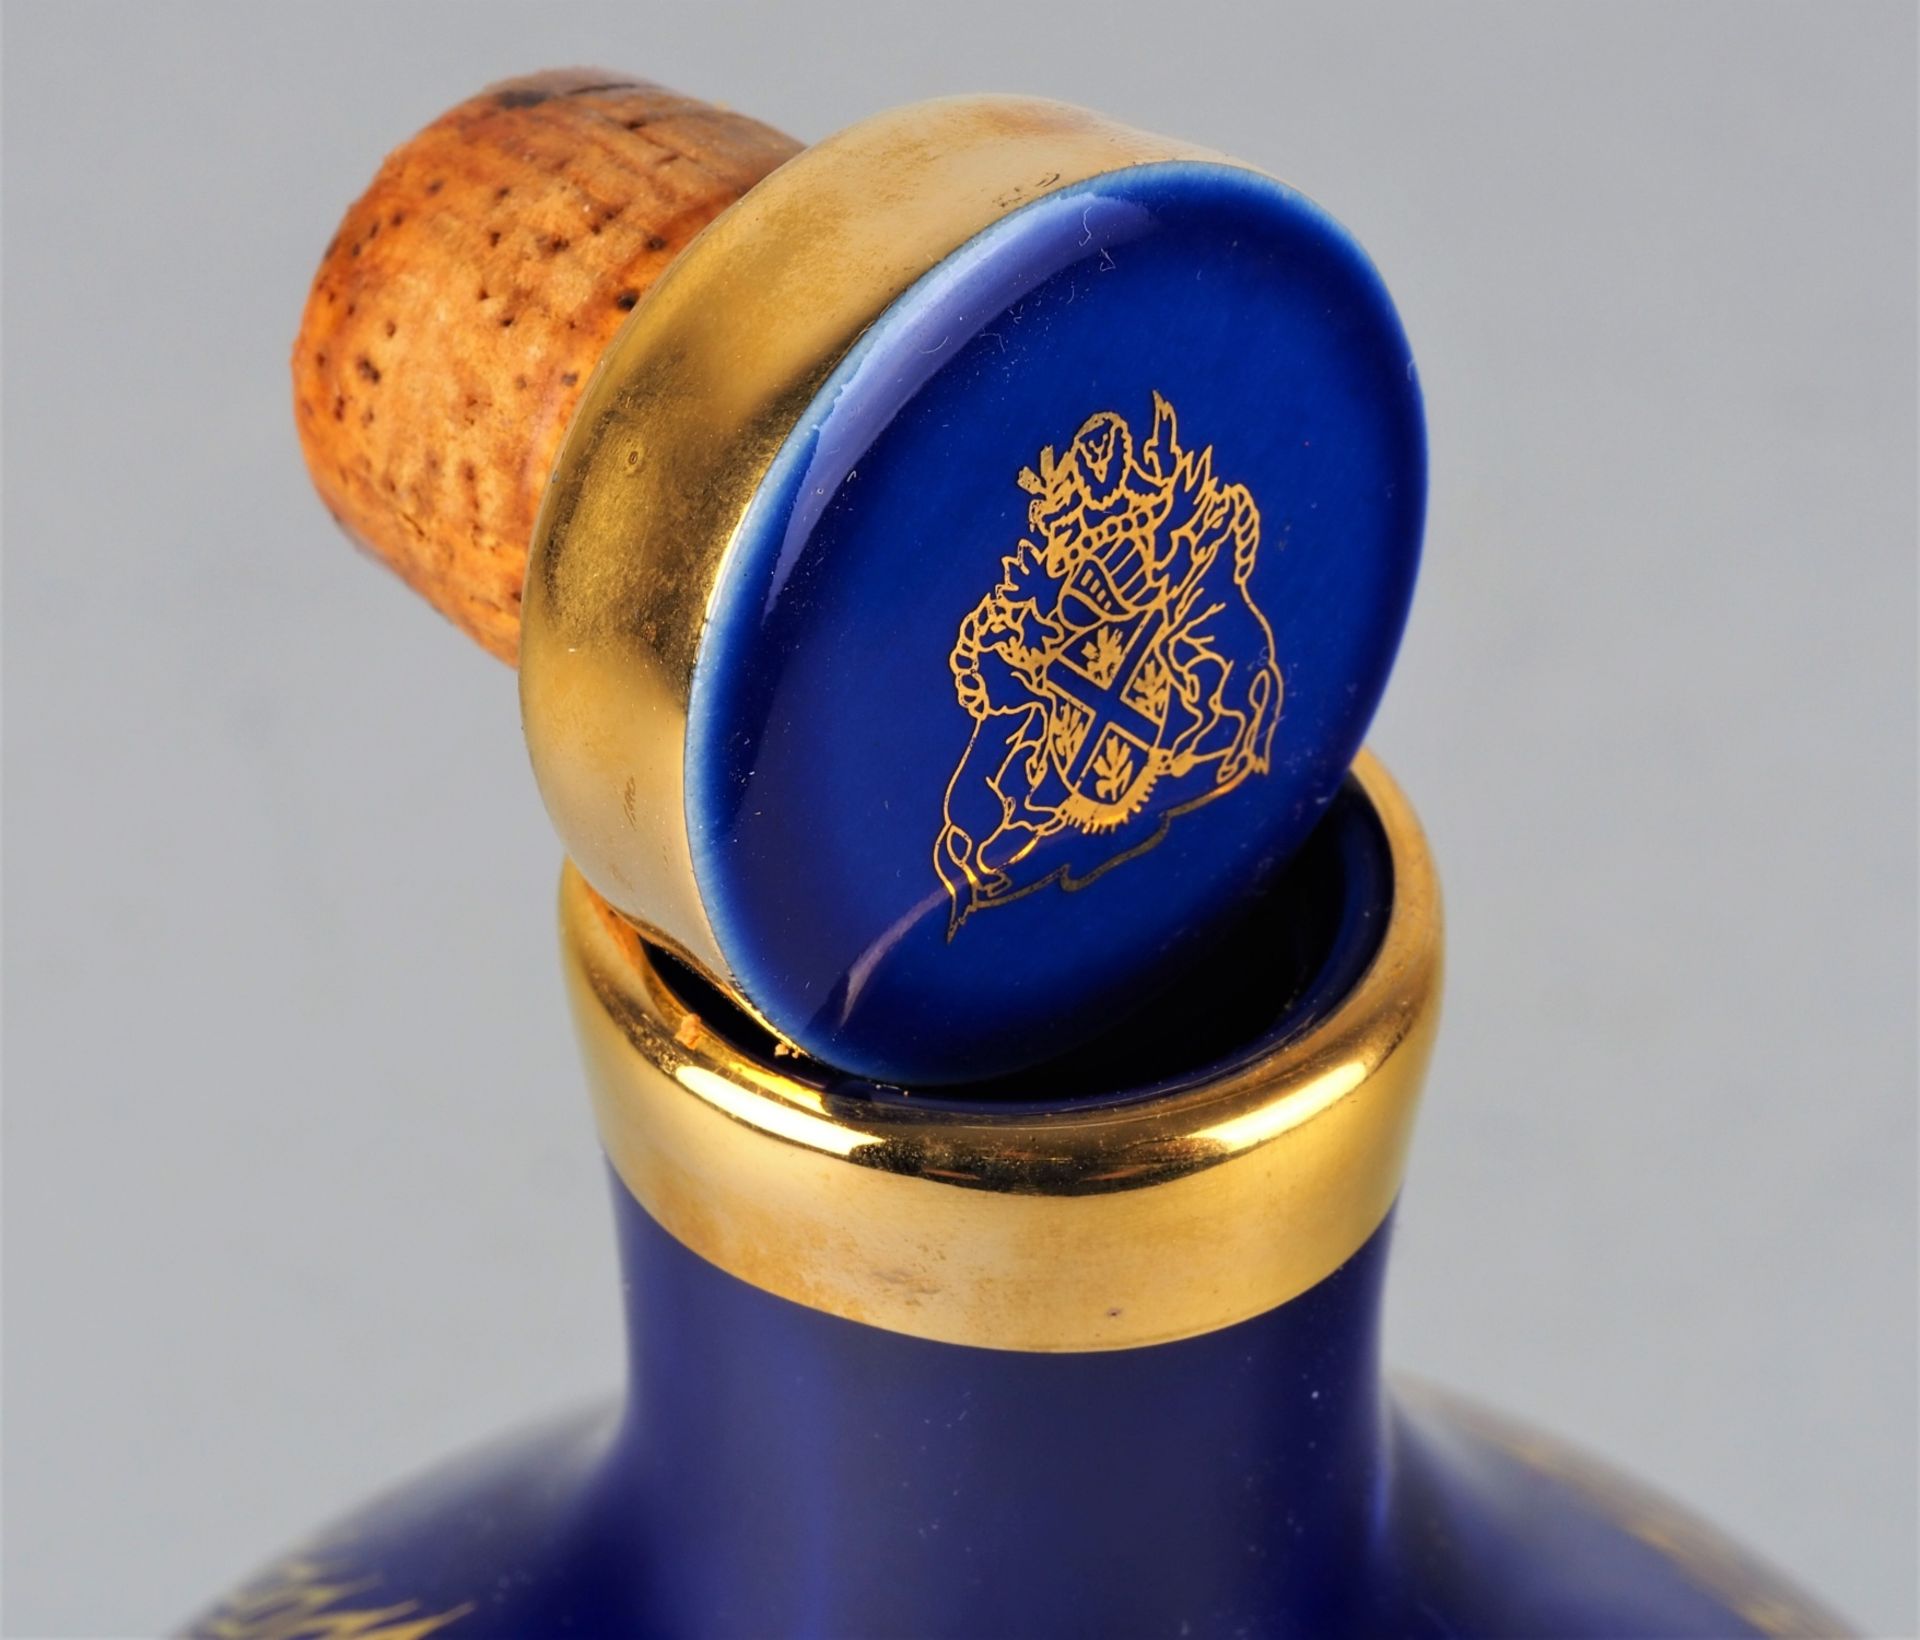 Dimple Blue Decanter Whisky, opened - Image 2 of 2